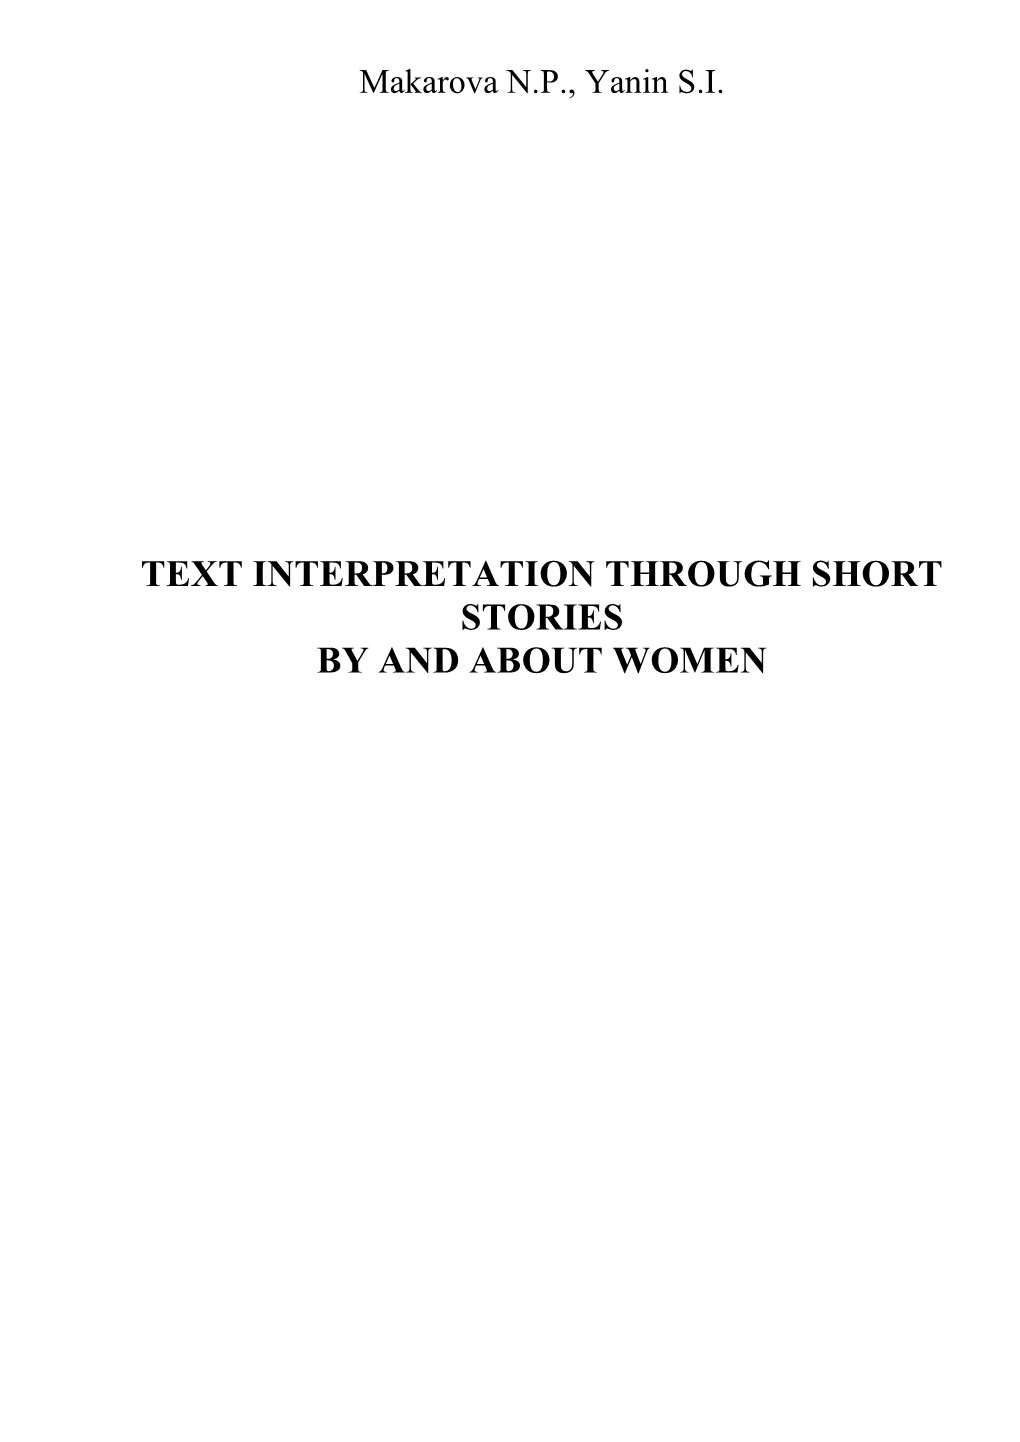 Text Interpretation Through Short Stories by and About Women